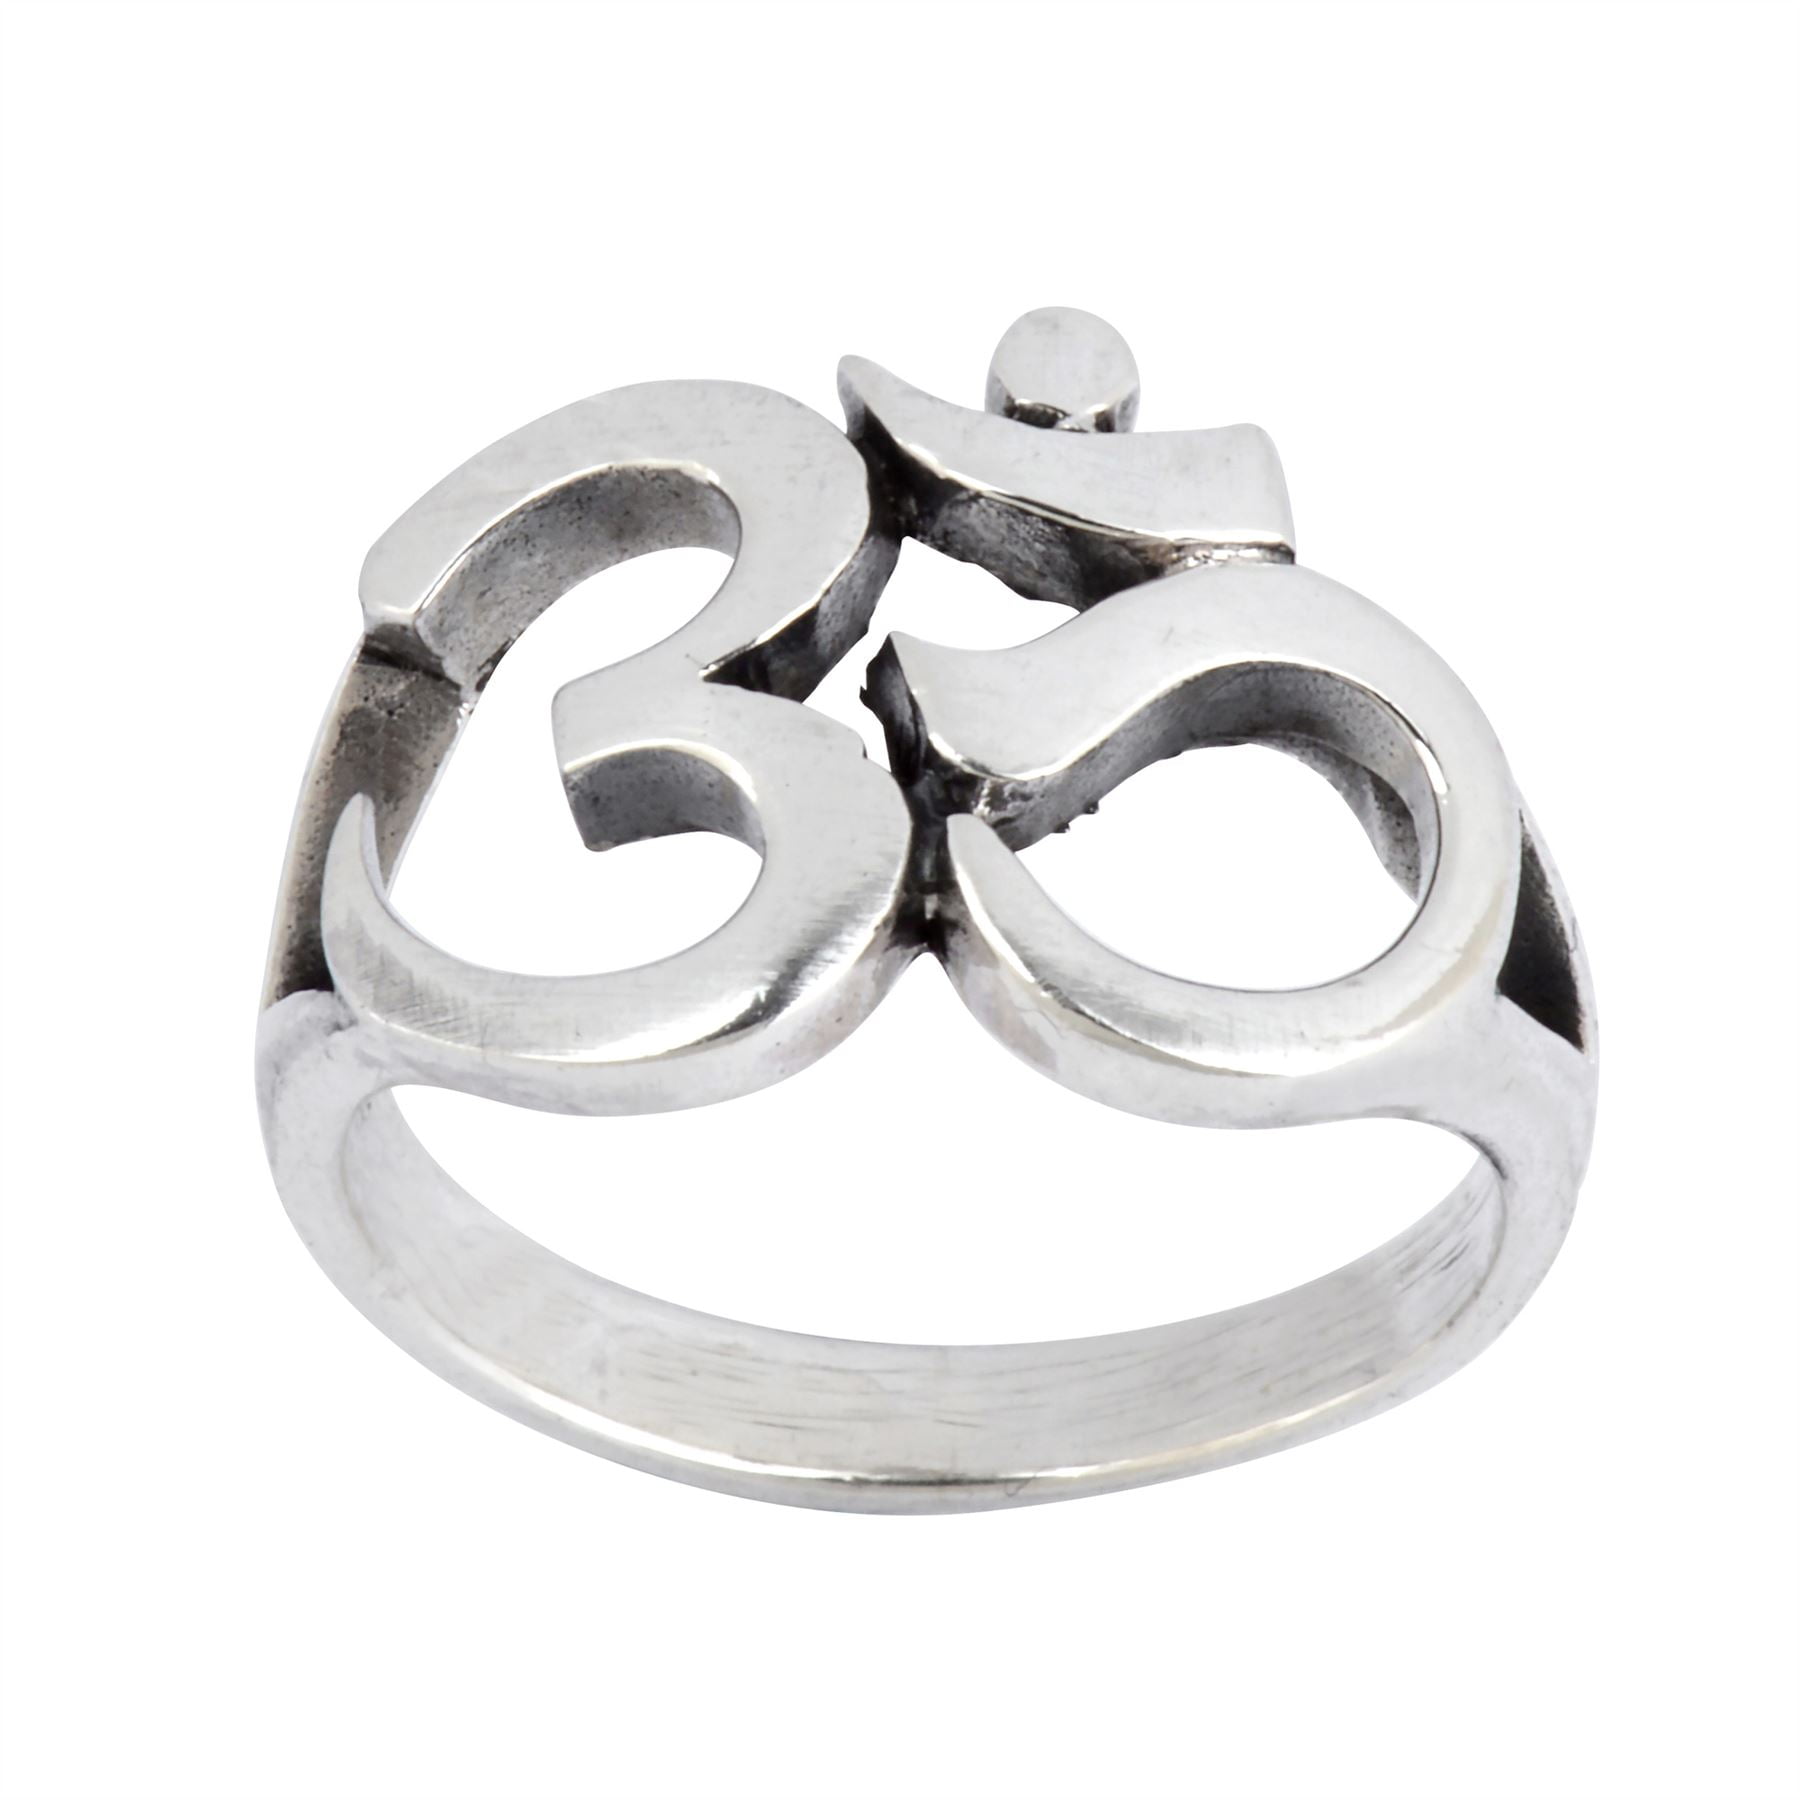 Om Ring 925 STERLING SILVER 925 - ELIZ Jewelry and Gems